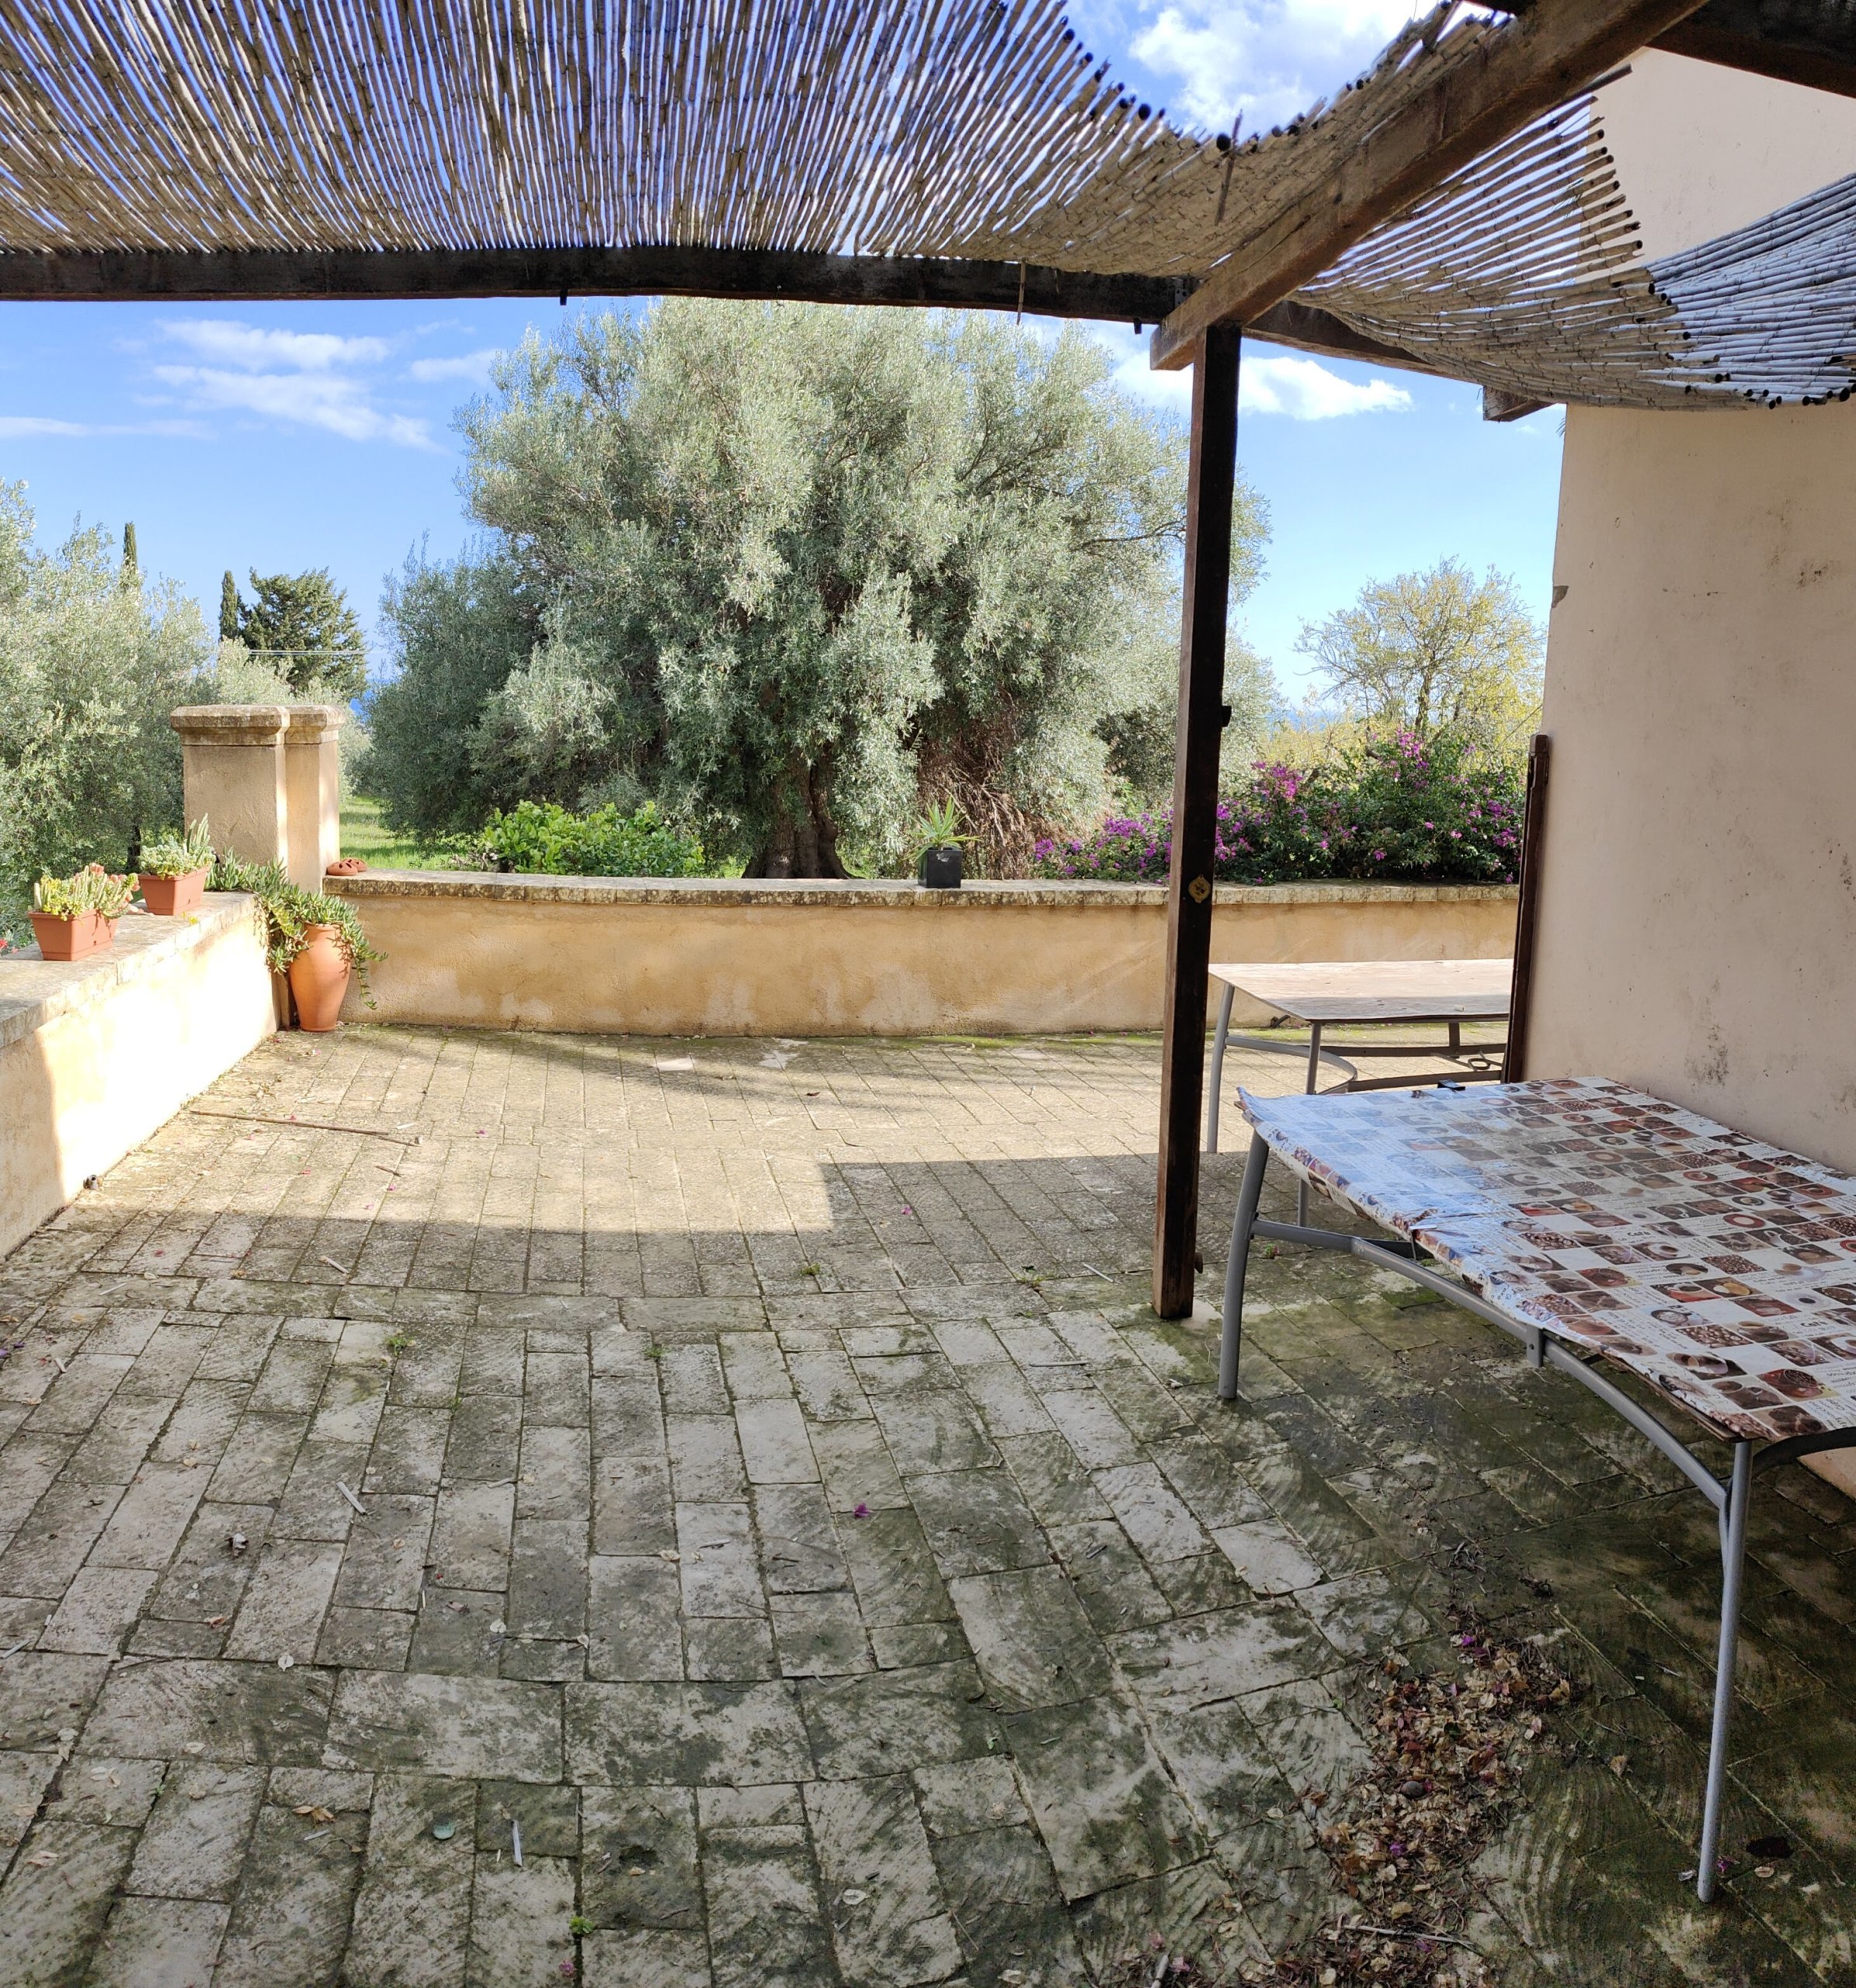 For sale "Casale Del Frantoio" a panoramic estate between Avola and Noto